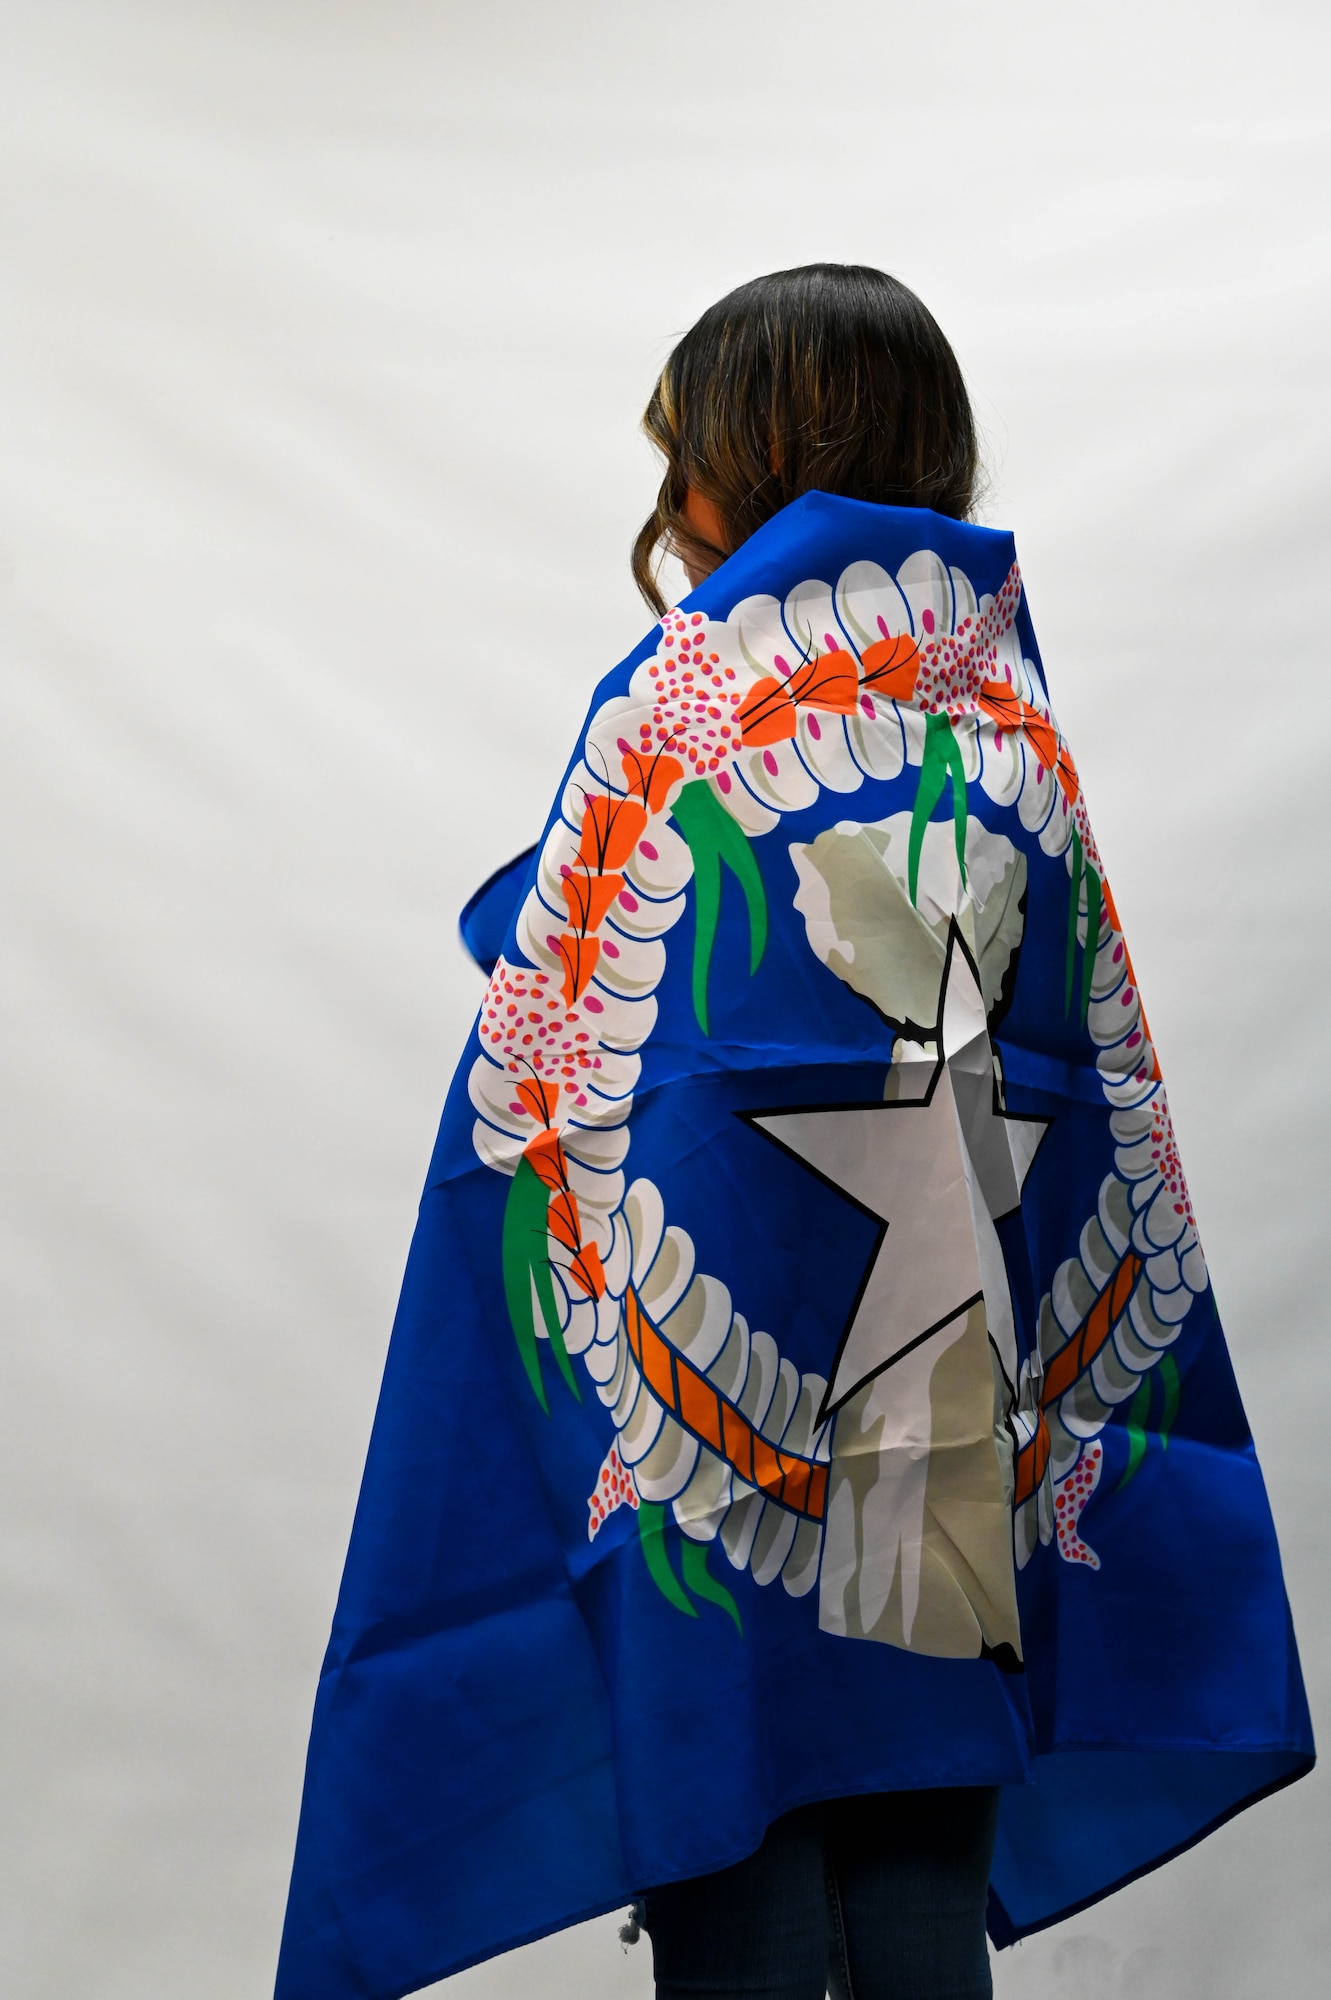 U.S. Air Force Staff Sgt. Margaret Celis, 97th Medical Group pharmacy technician, wraps herself in the flag of the Northern Mariana Islands at Altus Air Force Base, Oklahoma, May 25, 2022. The flag was adopted in 1985 and consists of three symbols: a star representing the United States, a latte stone representing the Chamorros, and a mwarmwar, a decorative wreath representing the Carolinians. The blue background represents the Pacific Ocean and the Mariana Trench. (U.S. Air Force photo by Senior Airman Kayla Christenson)